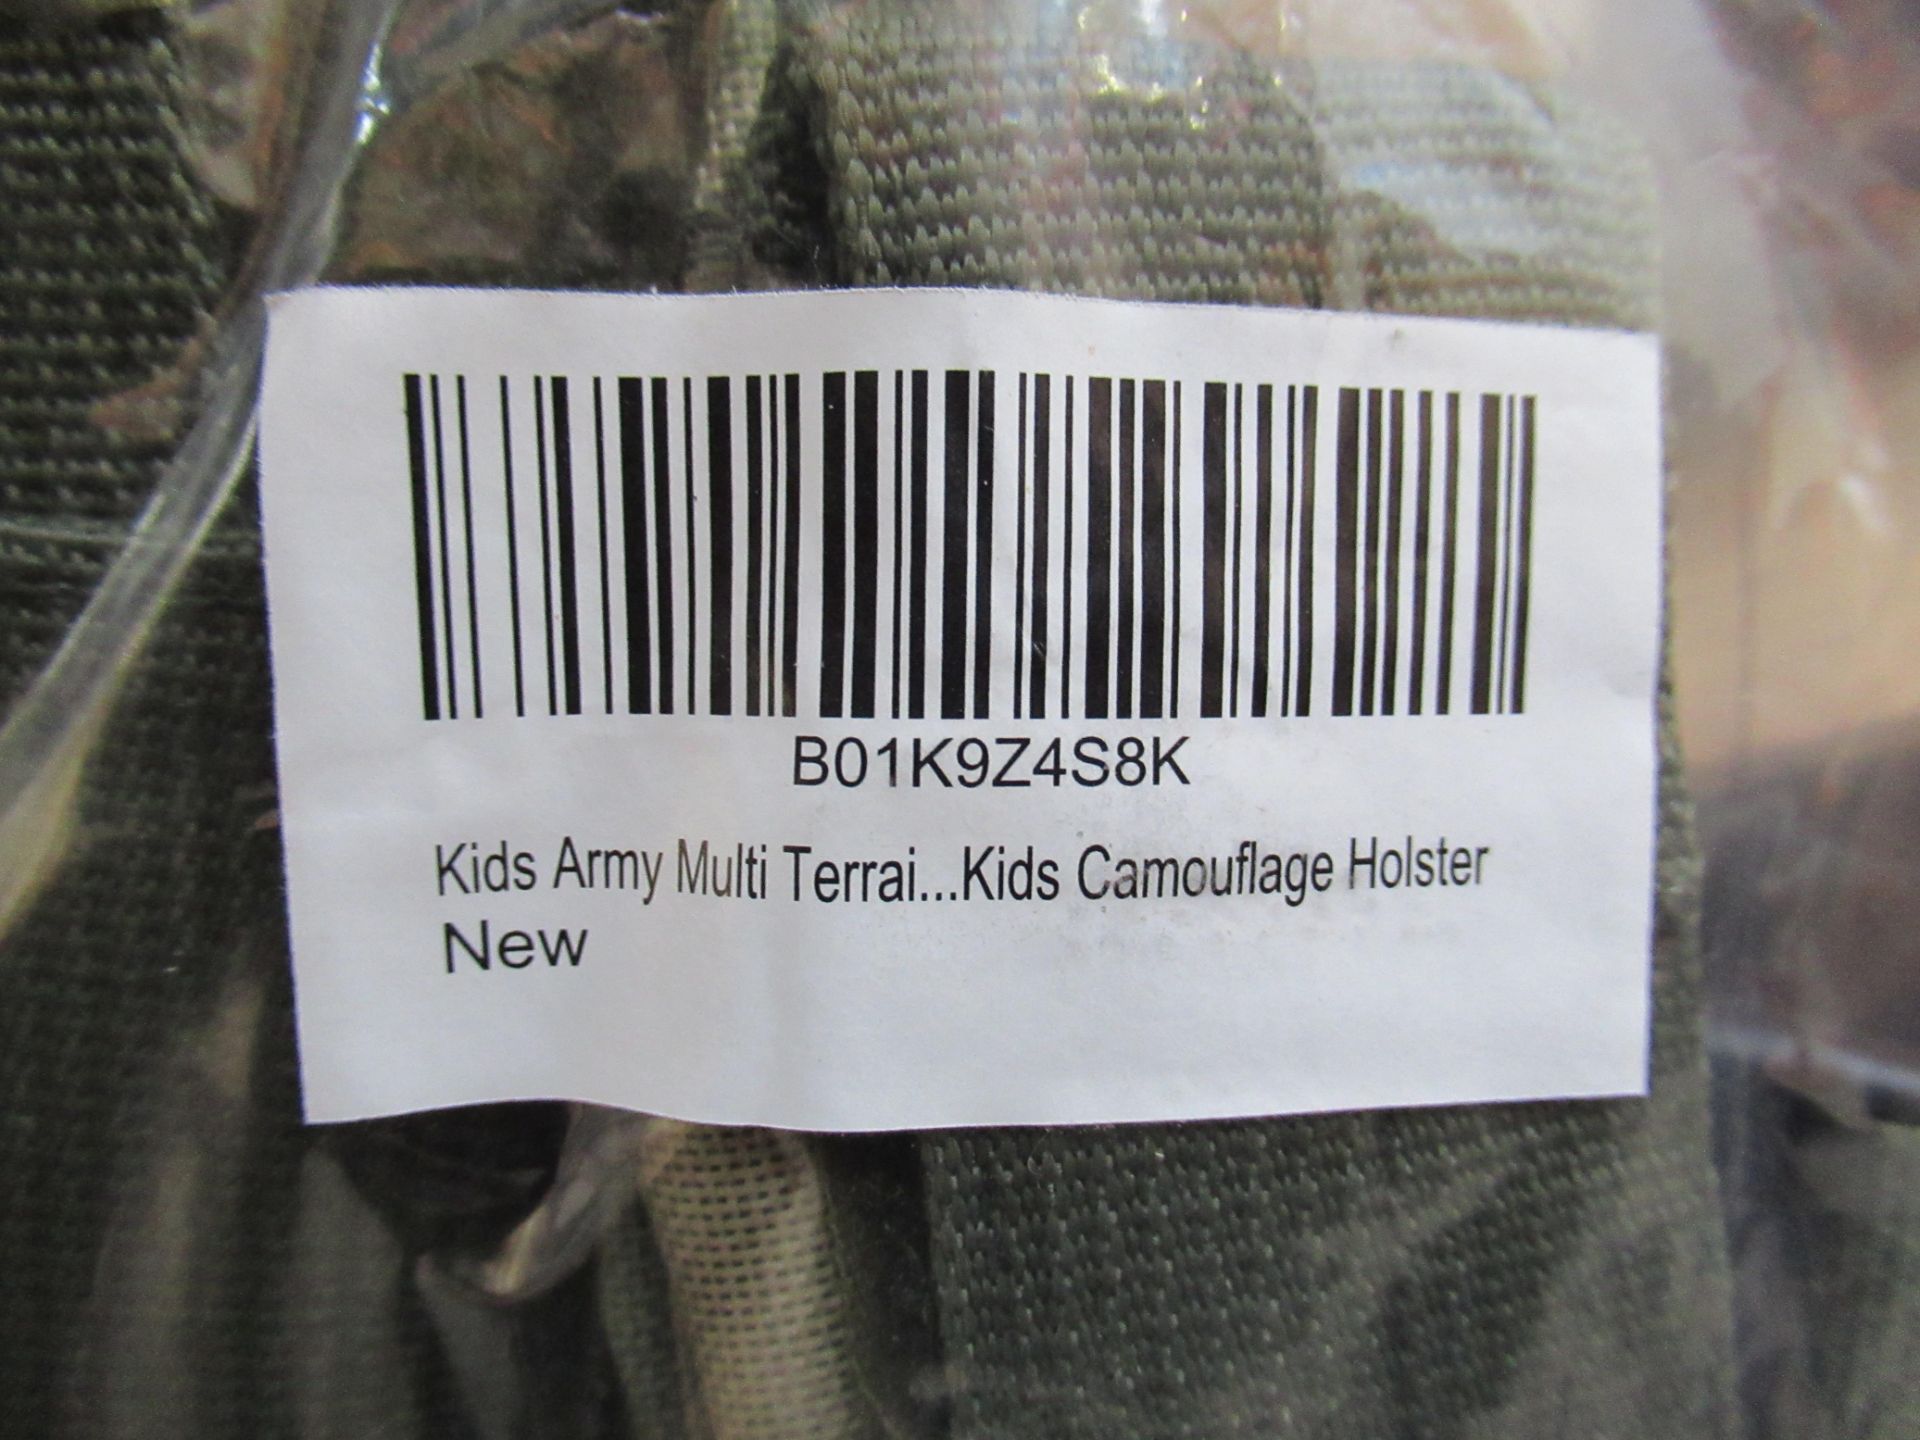 Box of childrens camoflage holsters - Image 3 of 3